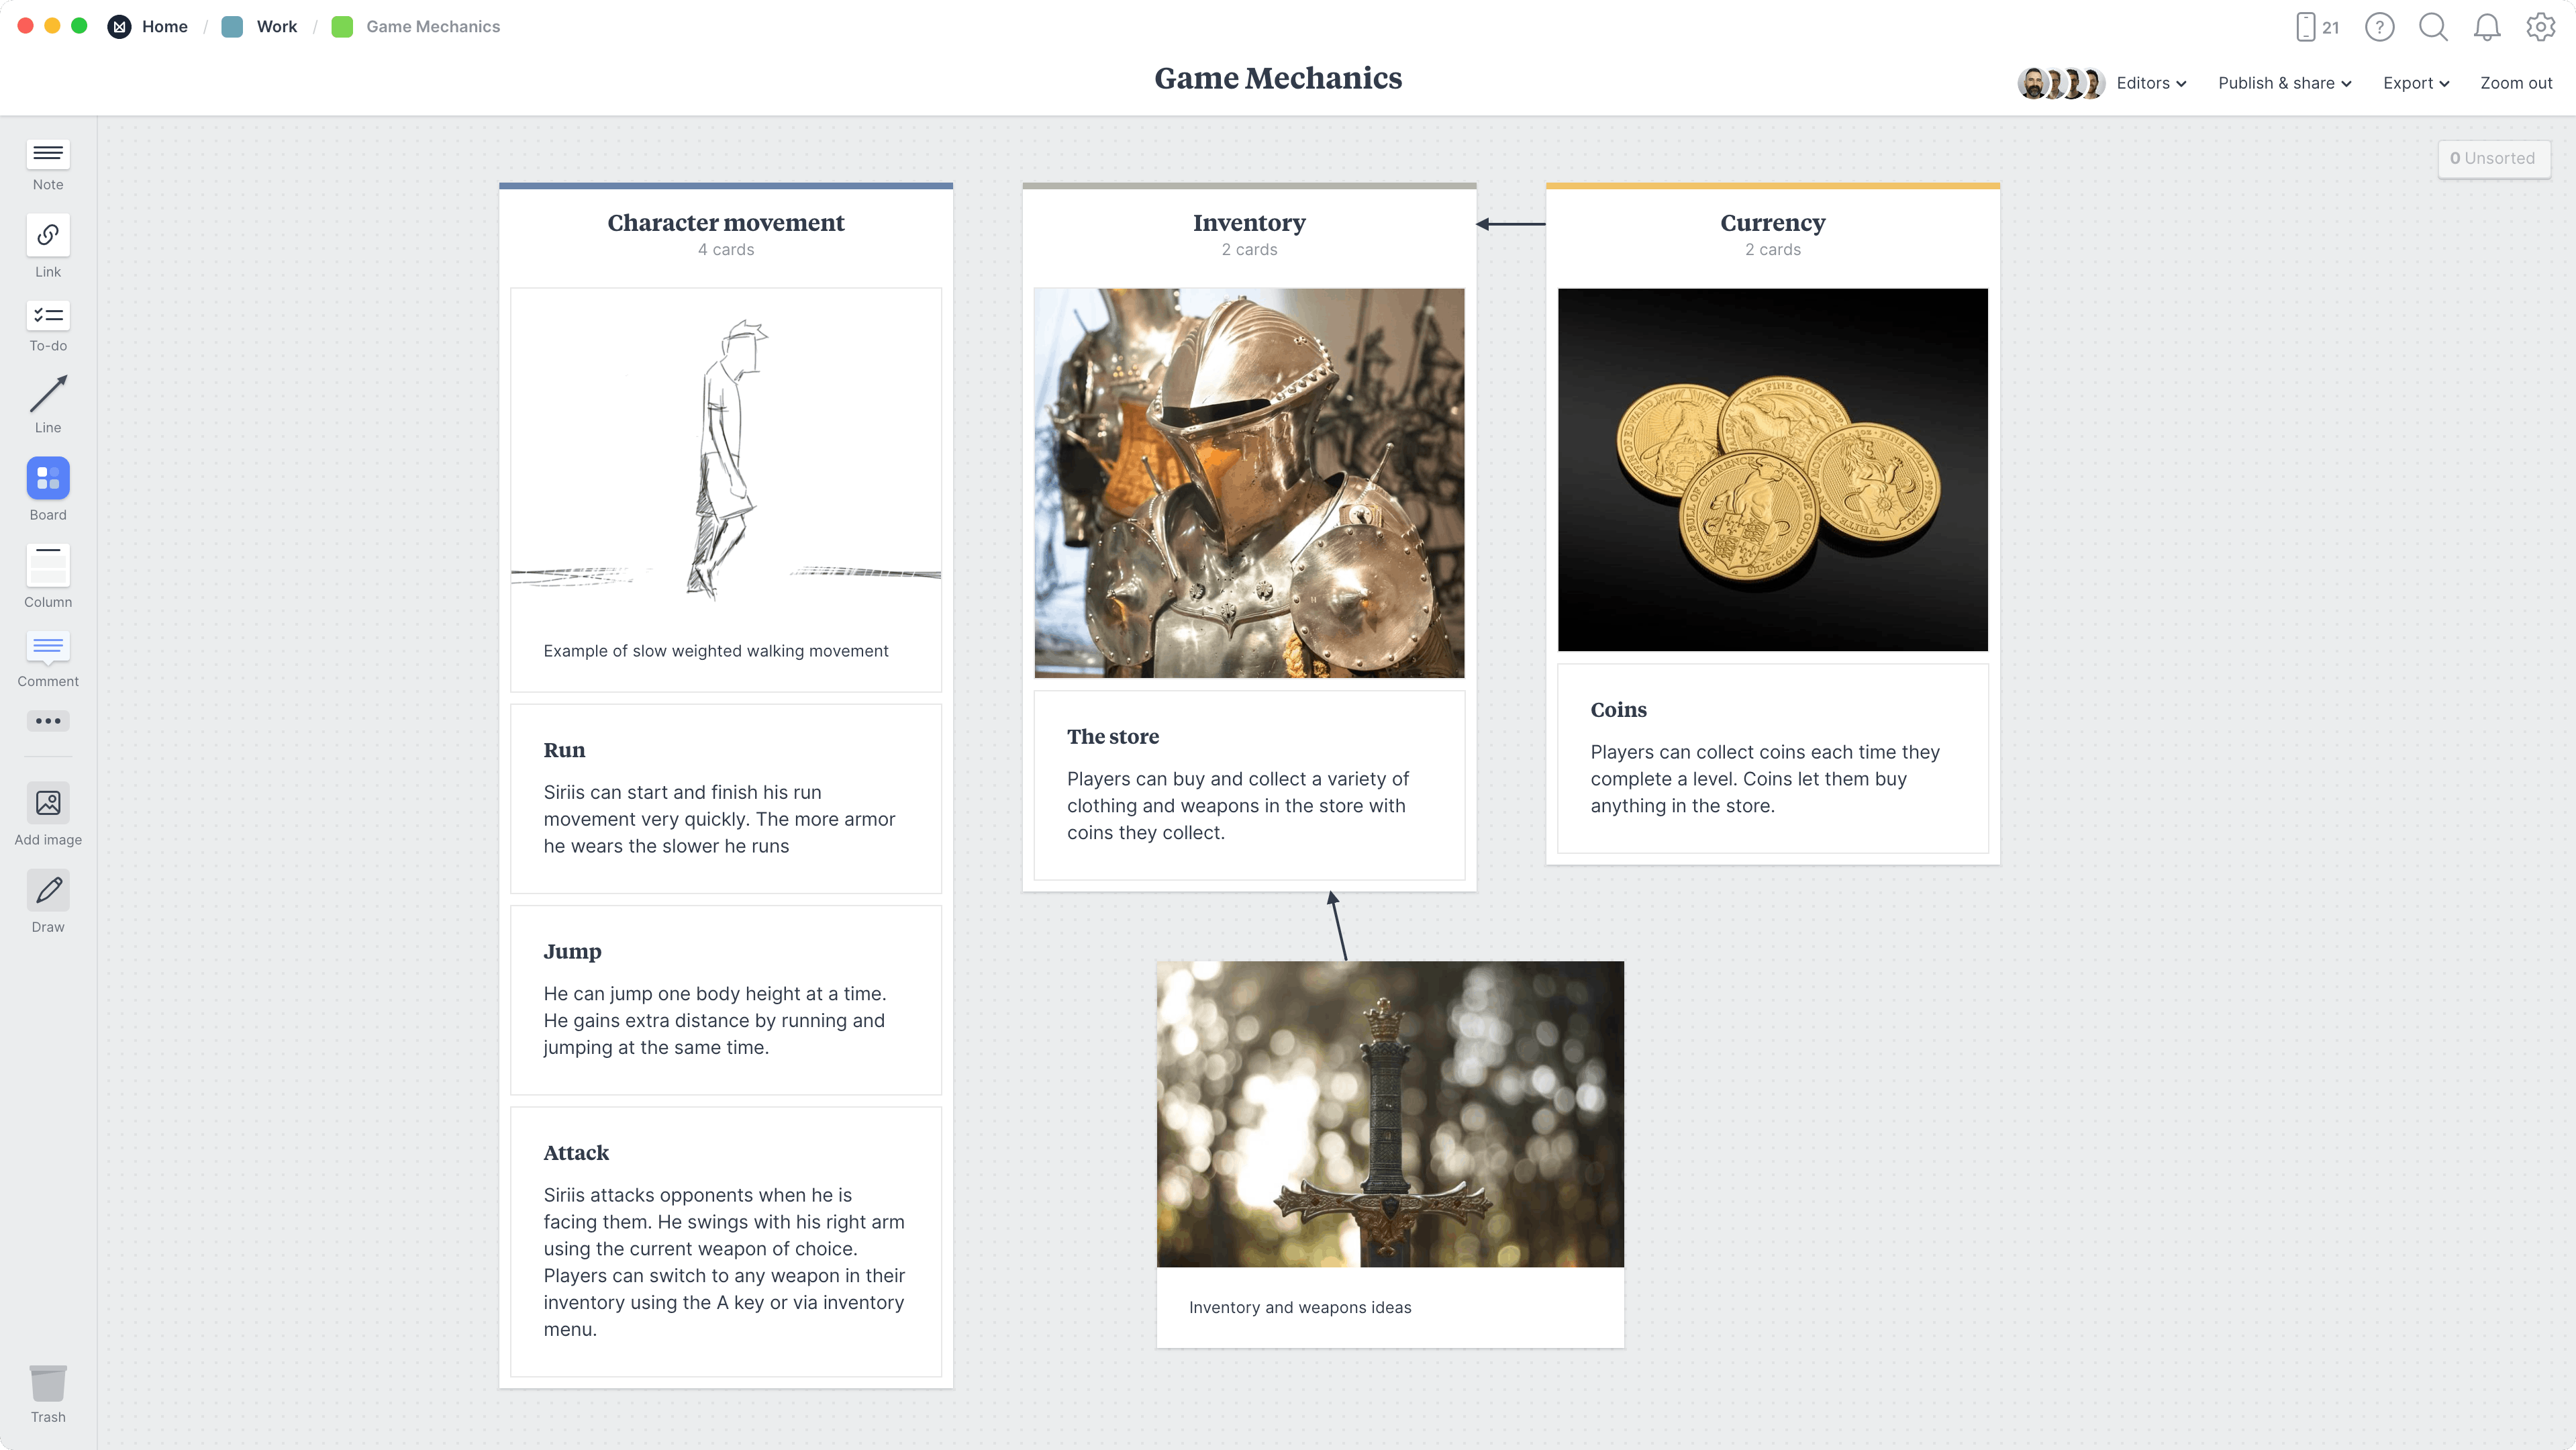 Game Mechanics Template, within the Milanote app